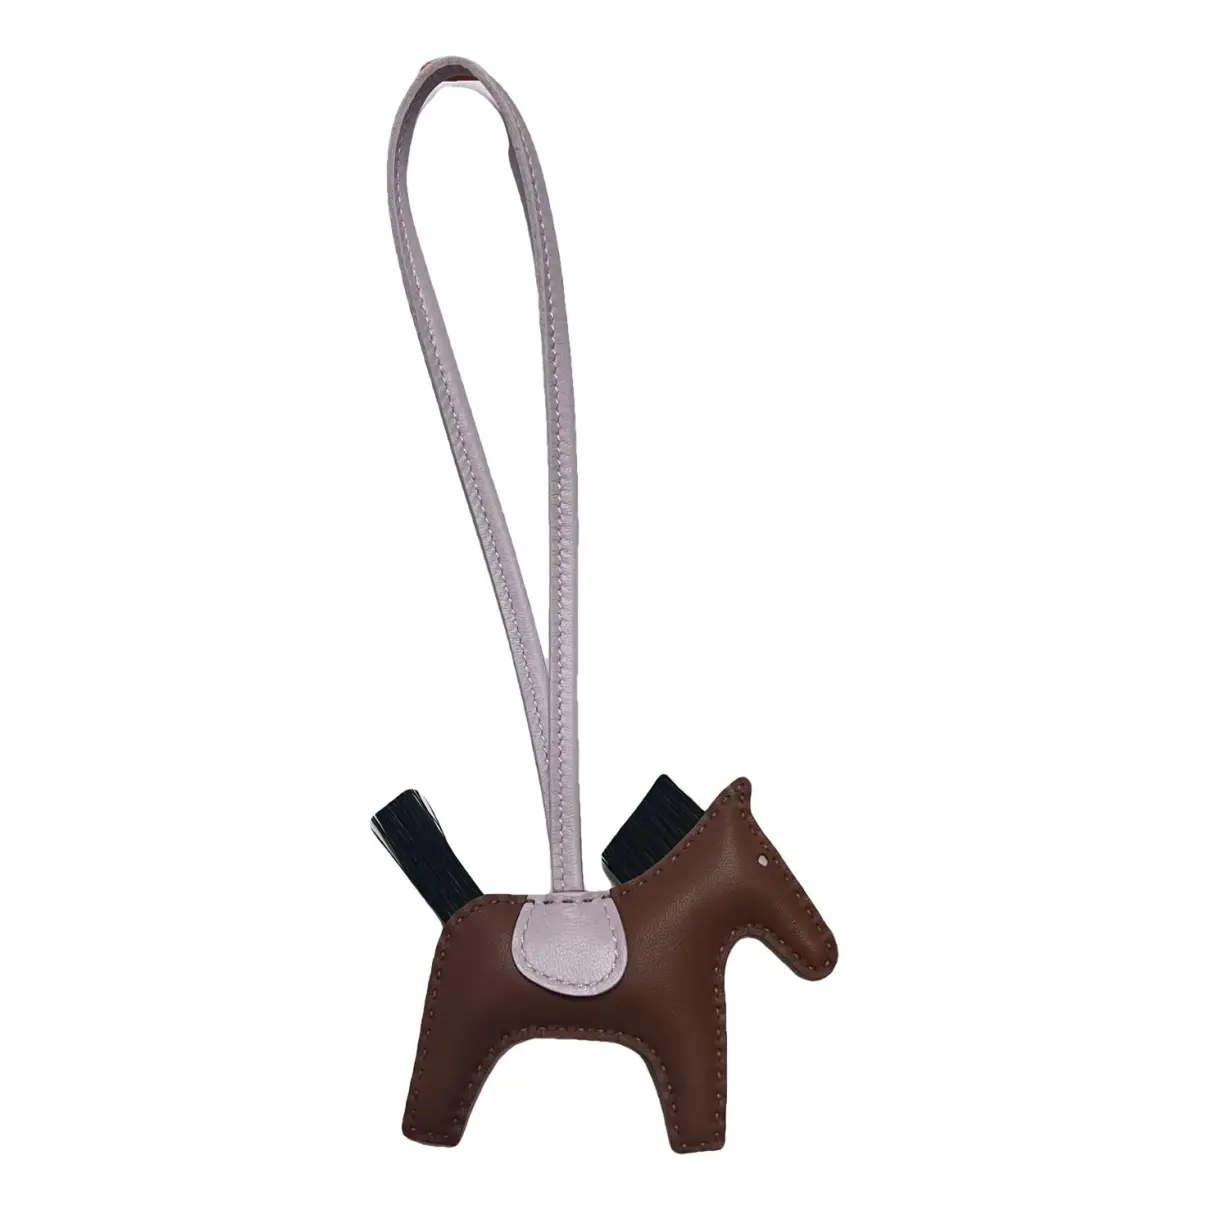 Rodeo leather bag charm